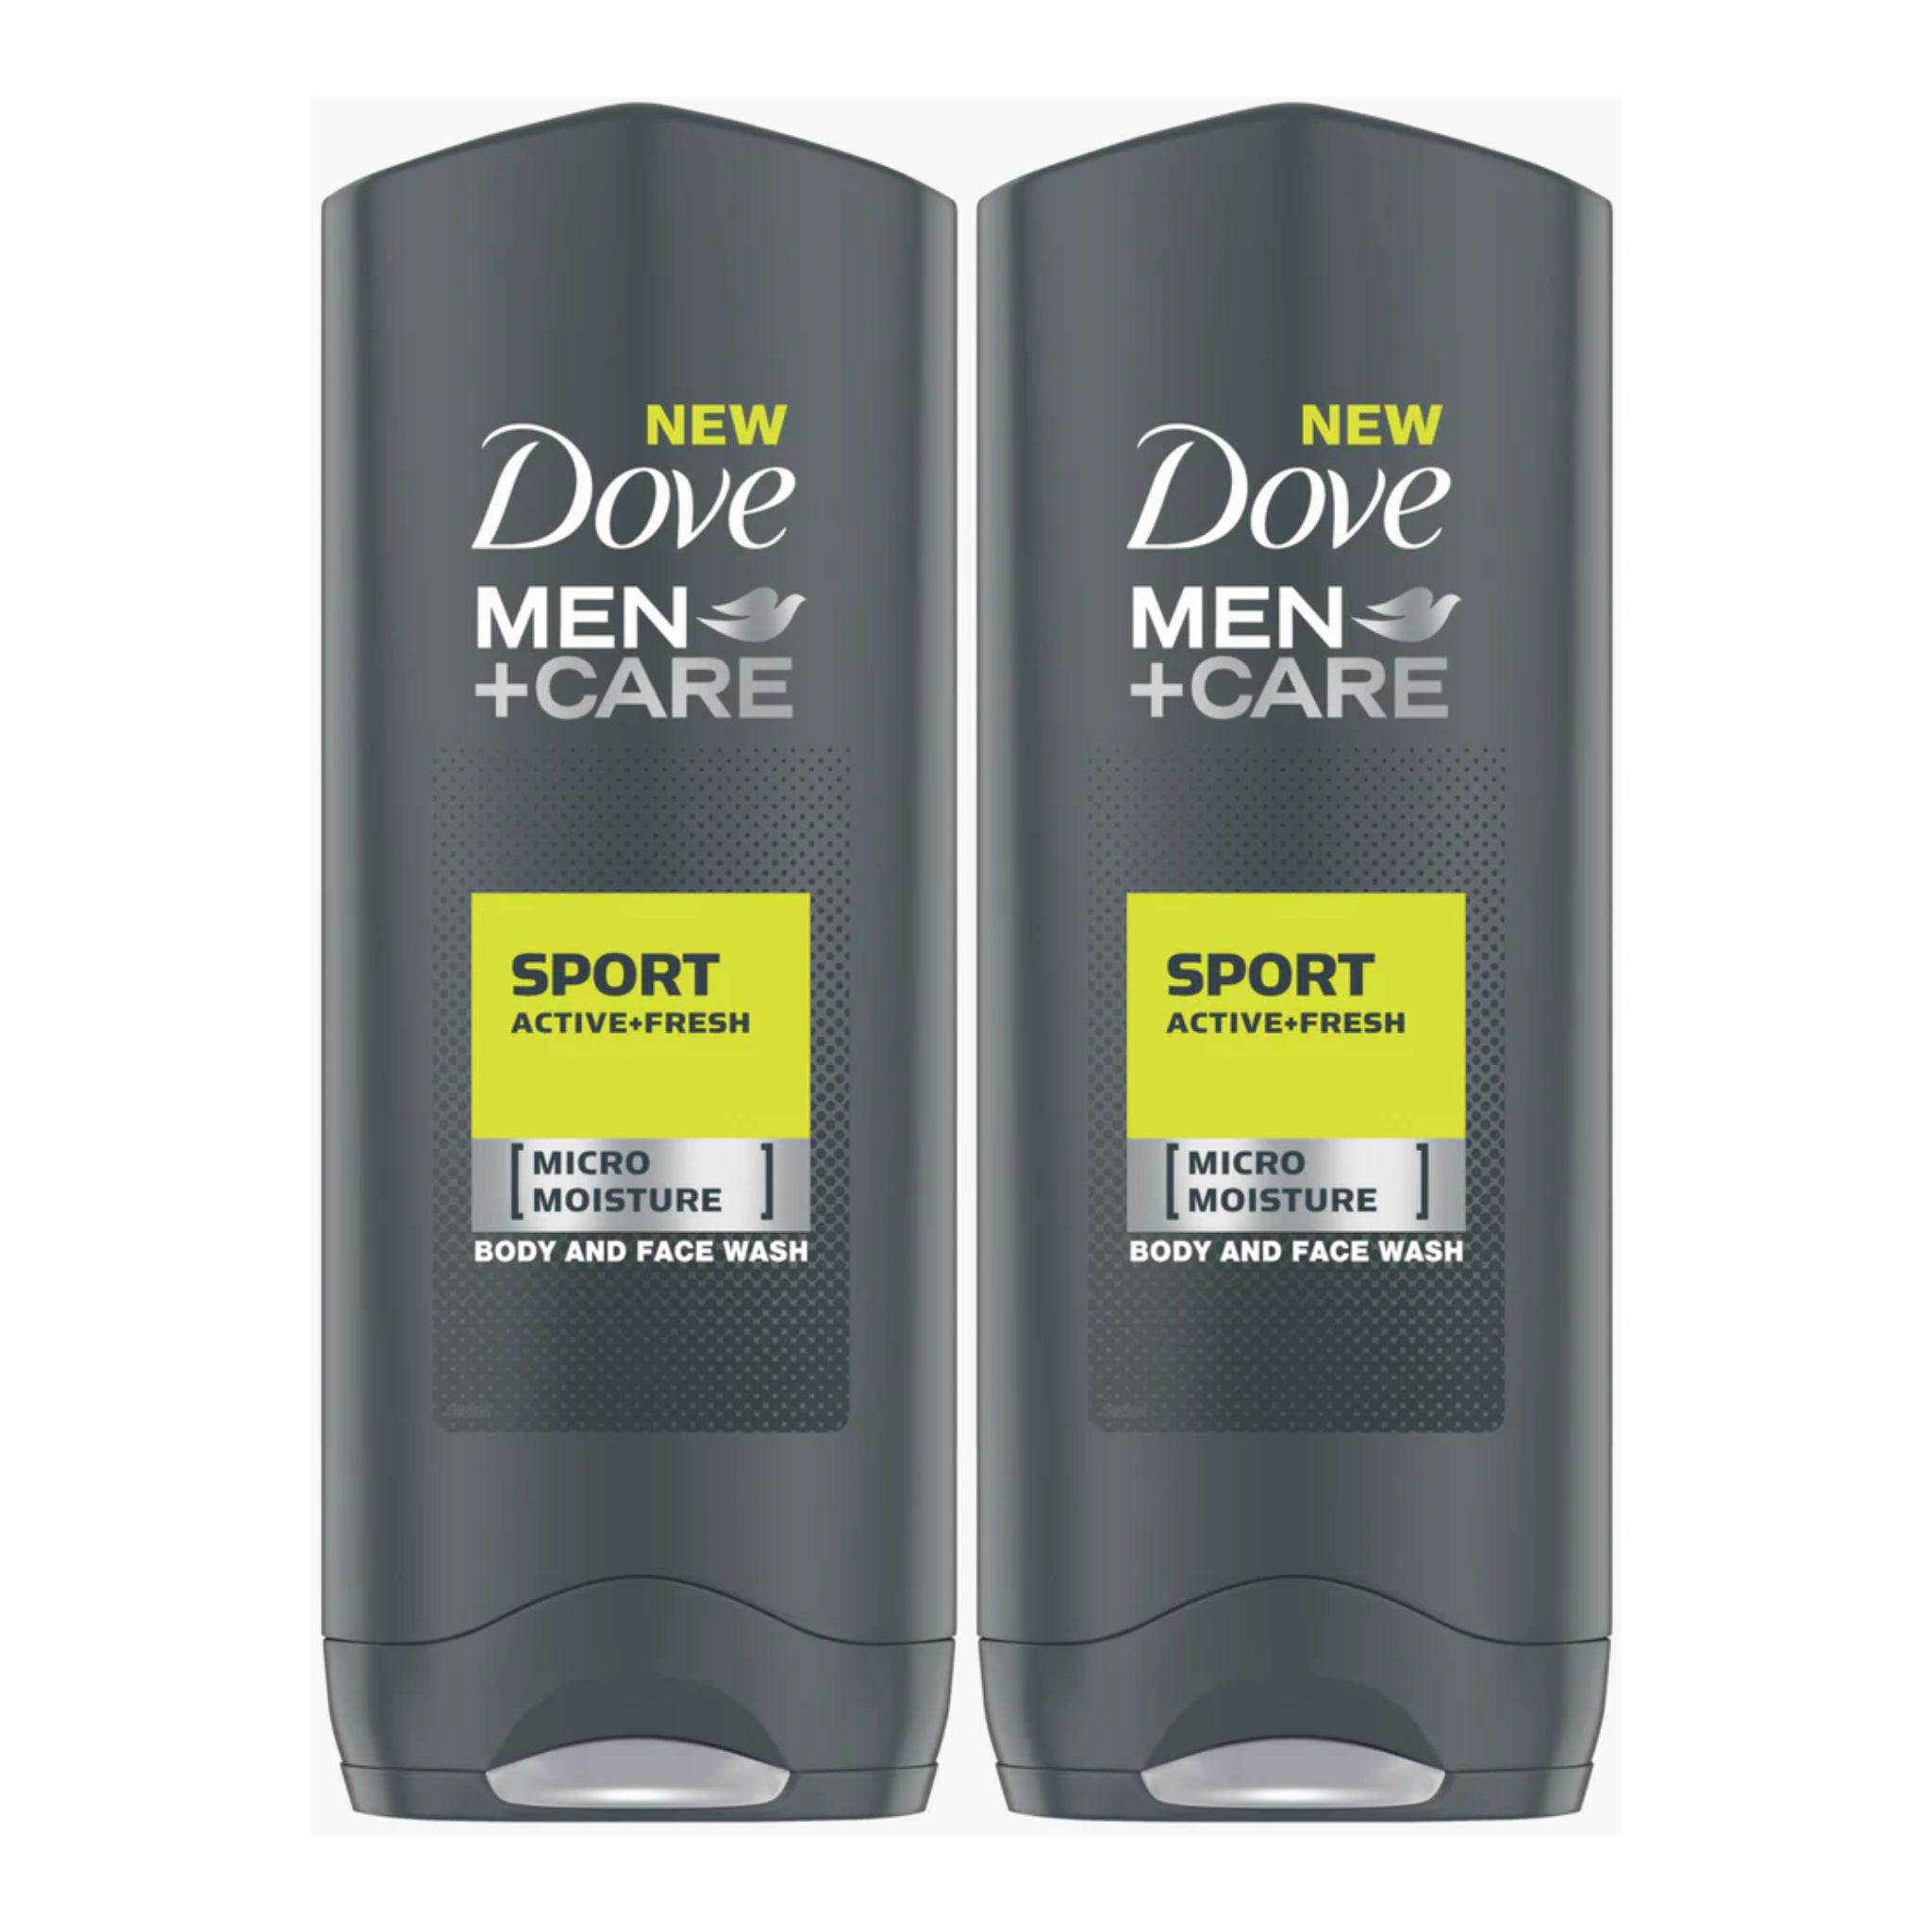 Dove Men+Care - Sport Active+Fresh Body Wash, 250ml (Pack of 2)